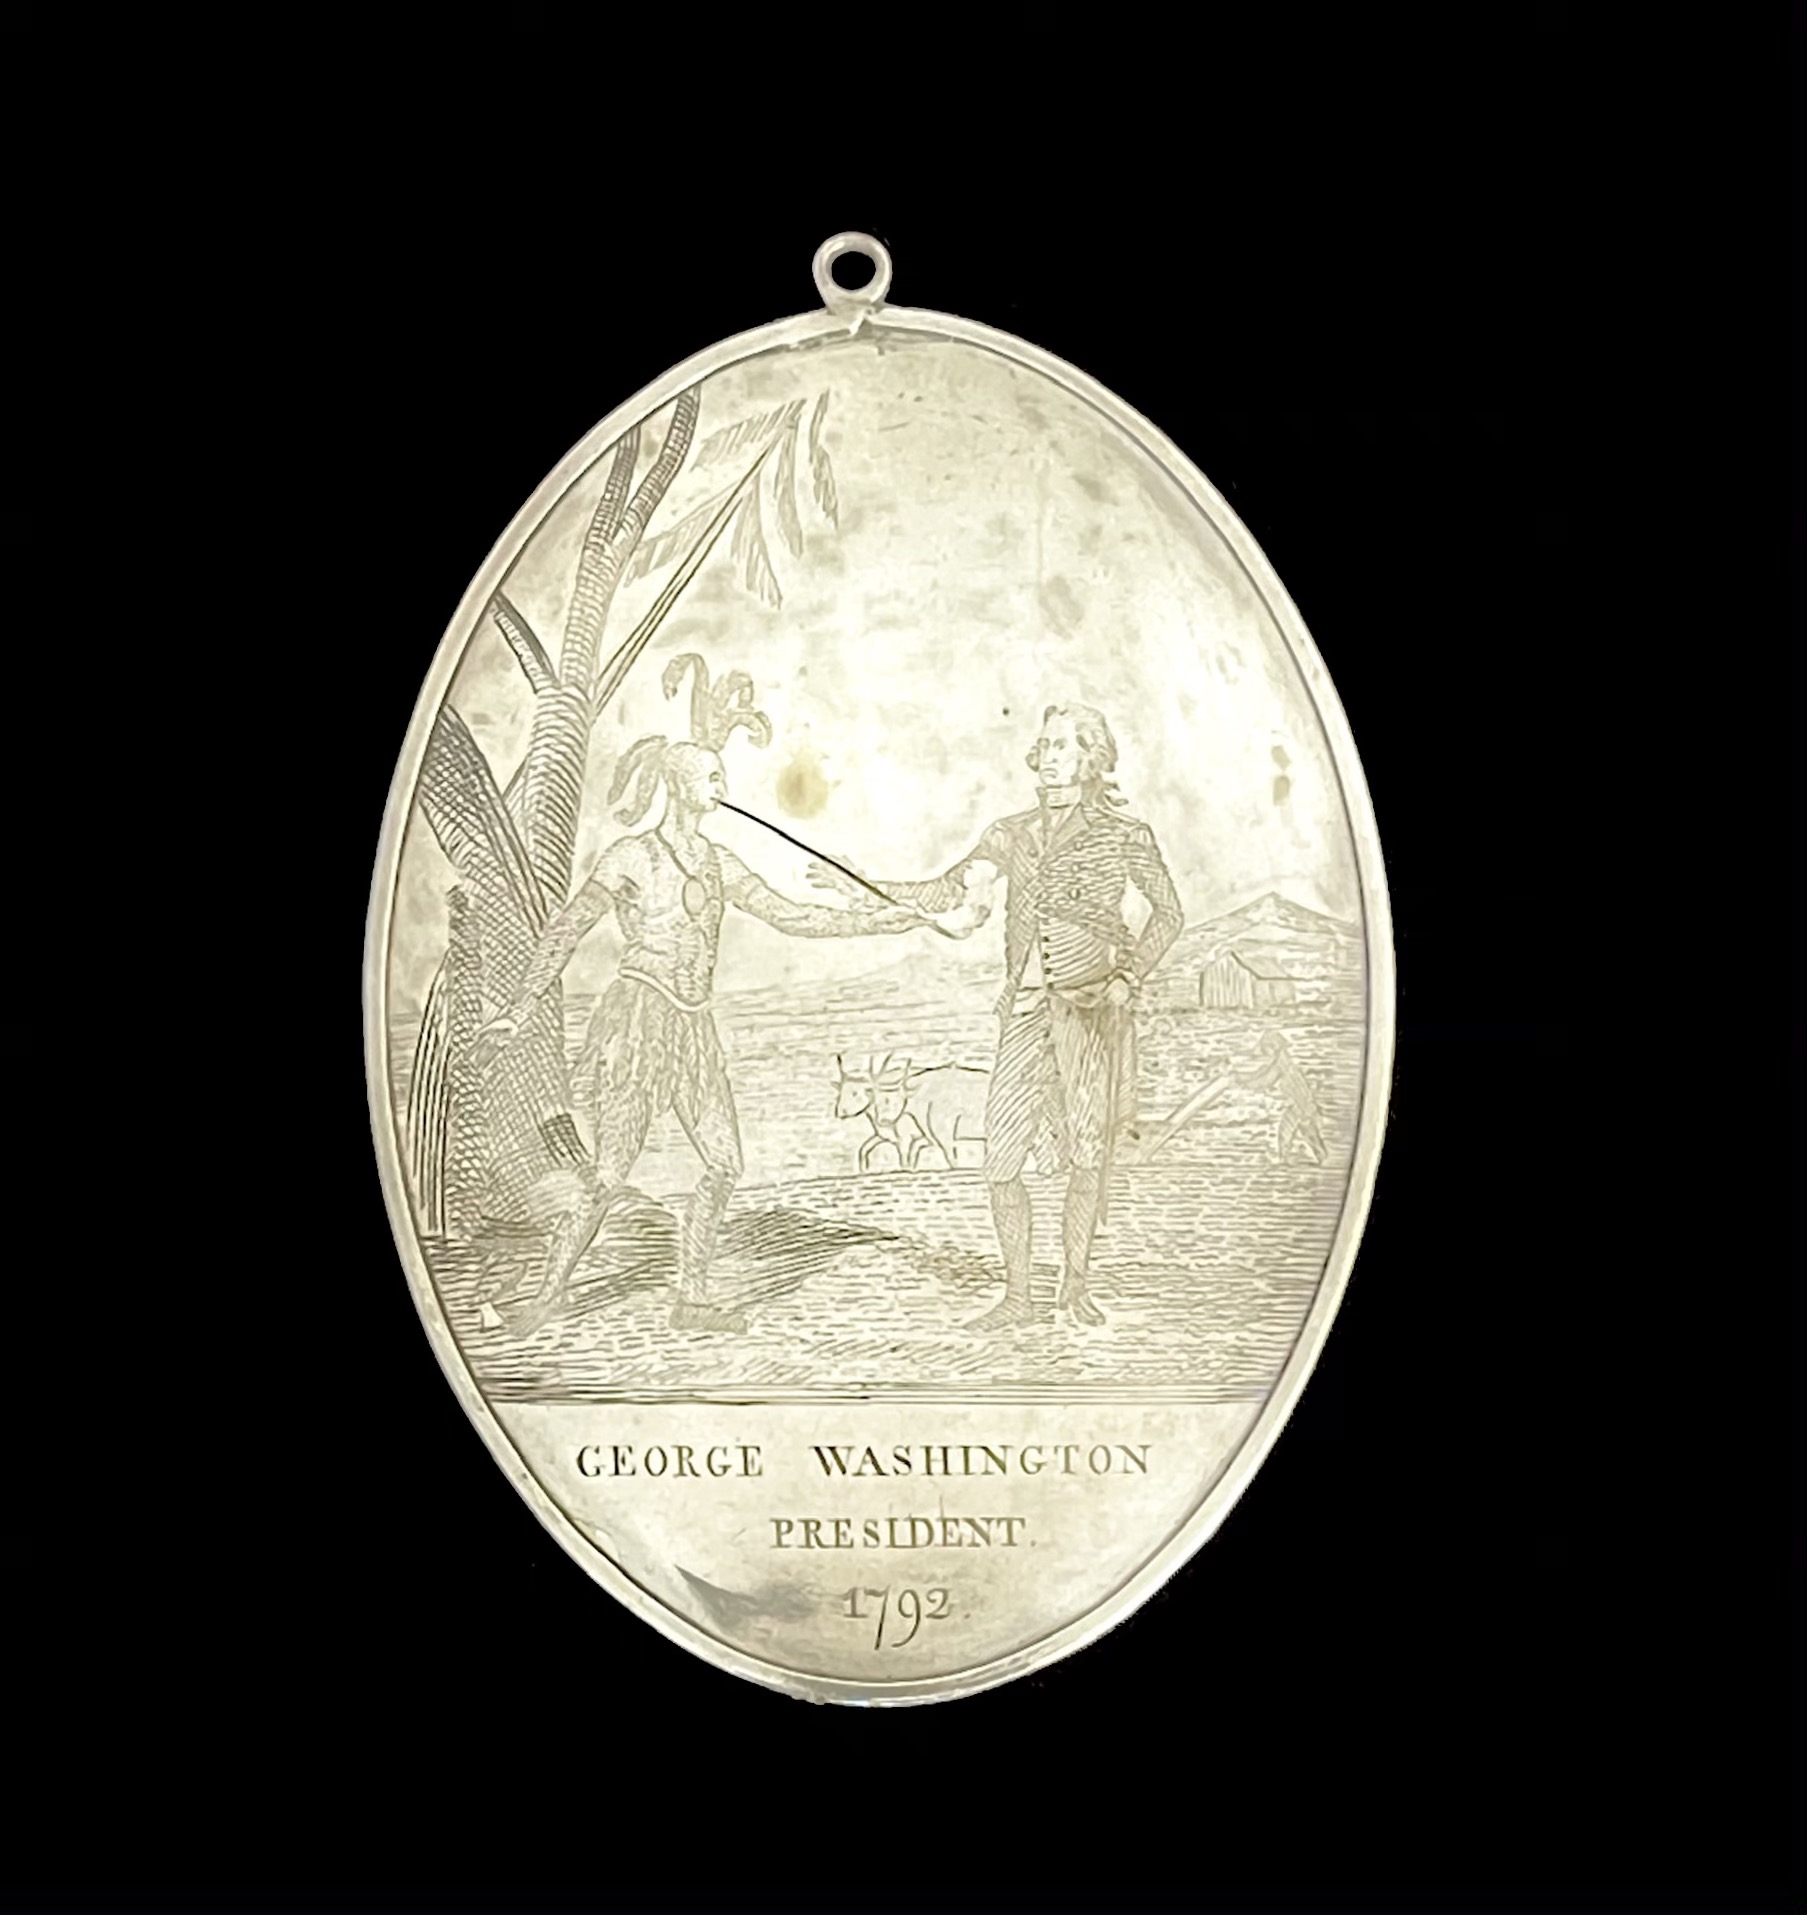 The Red Jacket Peace Medal (Image courtesy of The Buffalo History Museum)